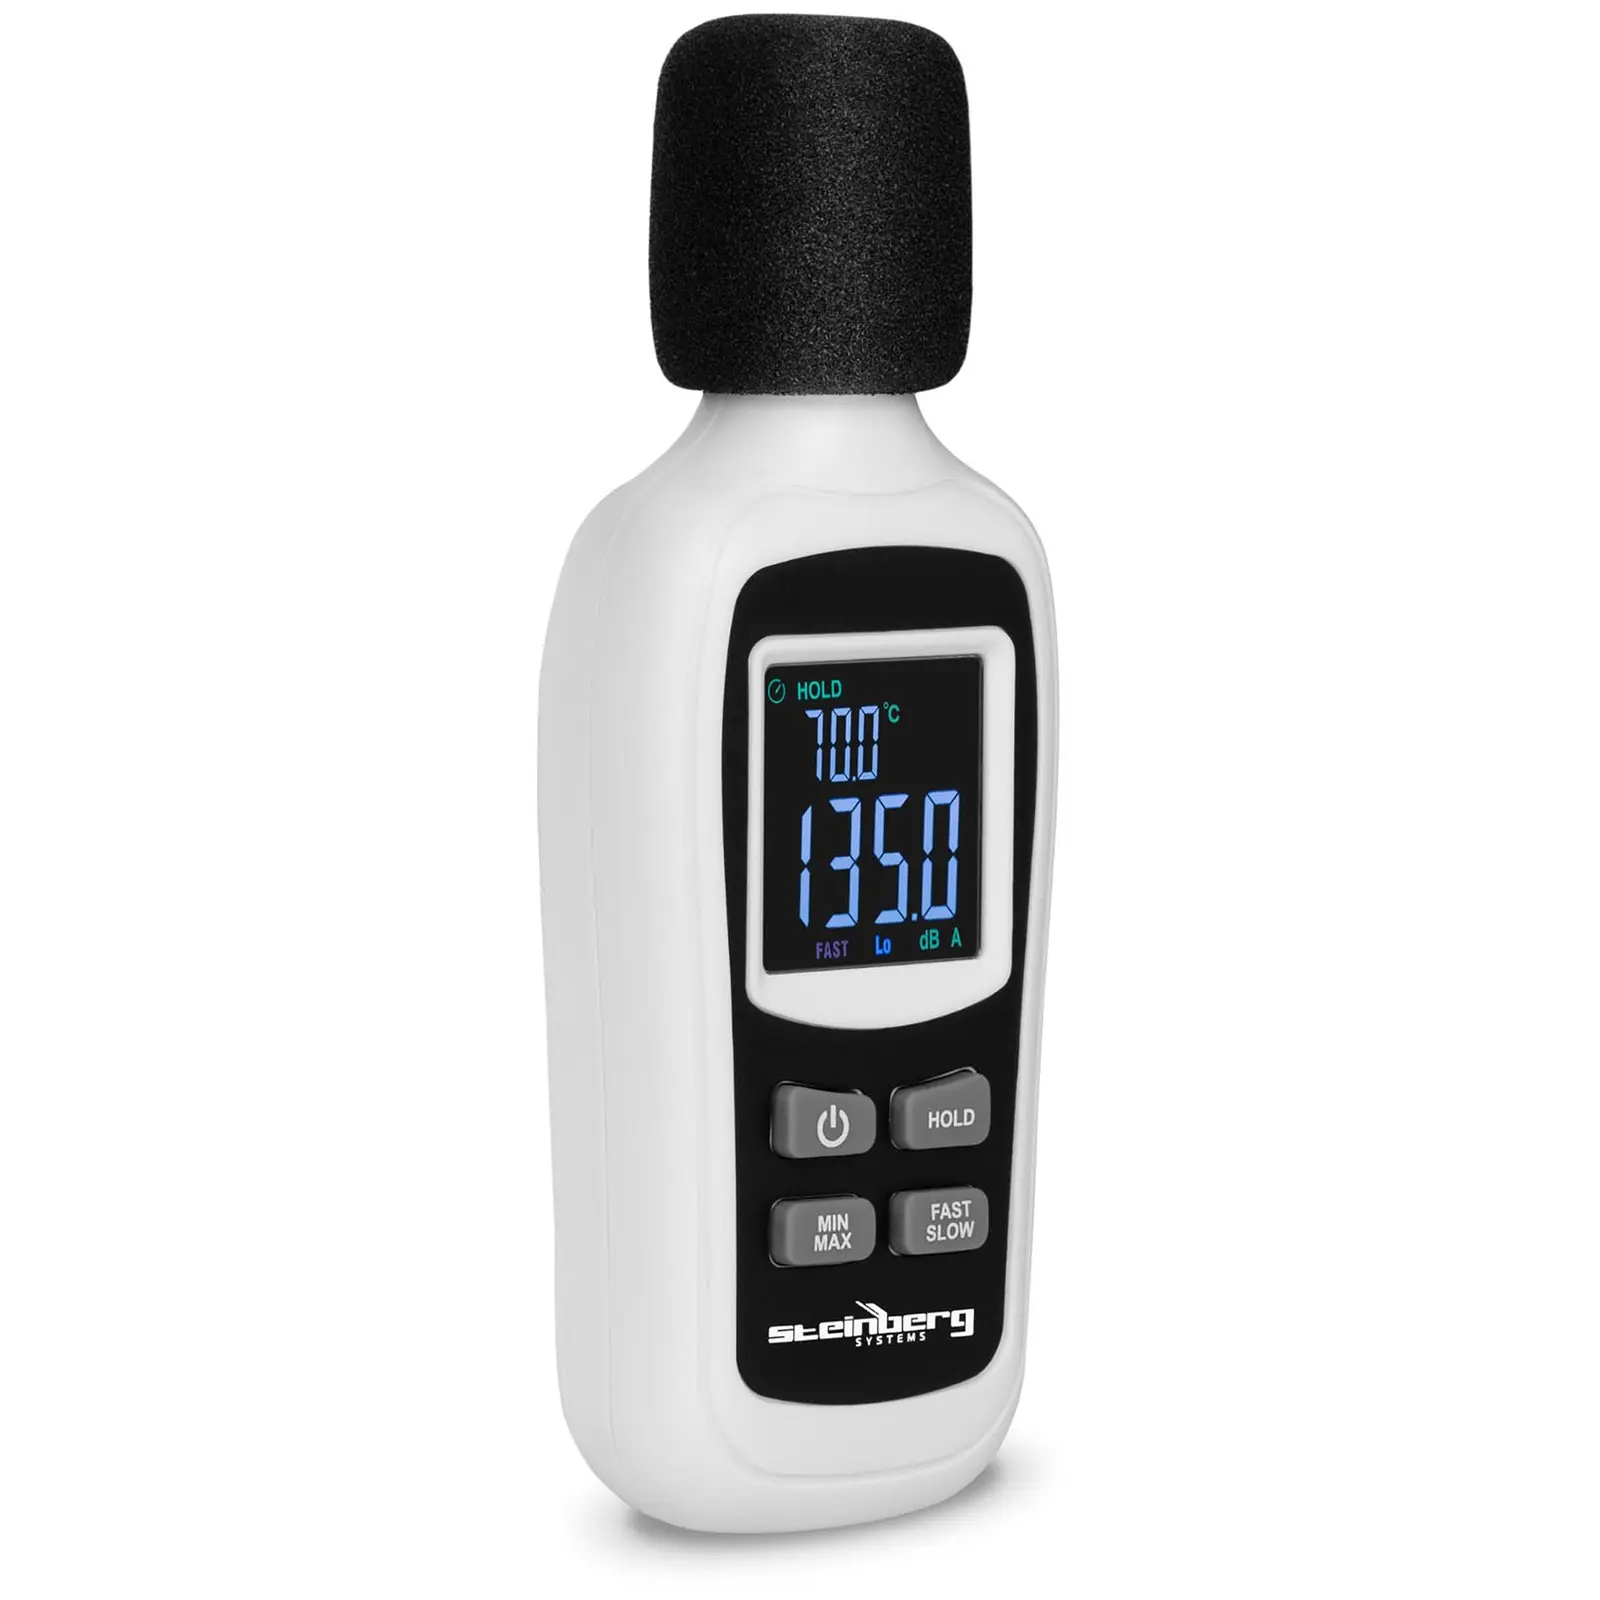 Factory second Sound Meter - 35 to 135 dB